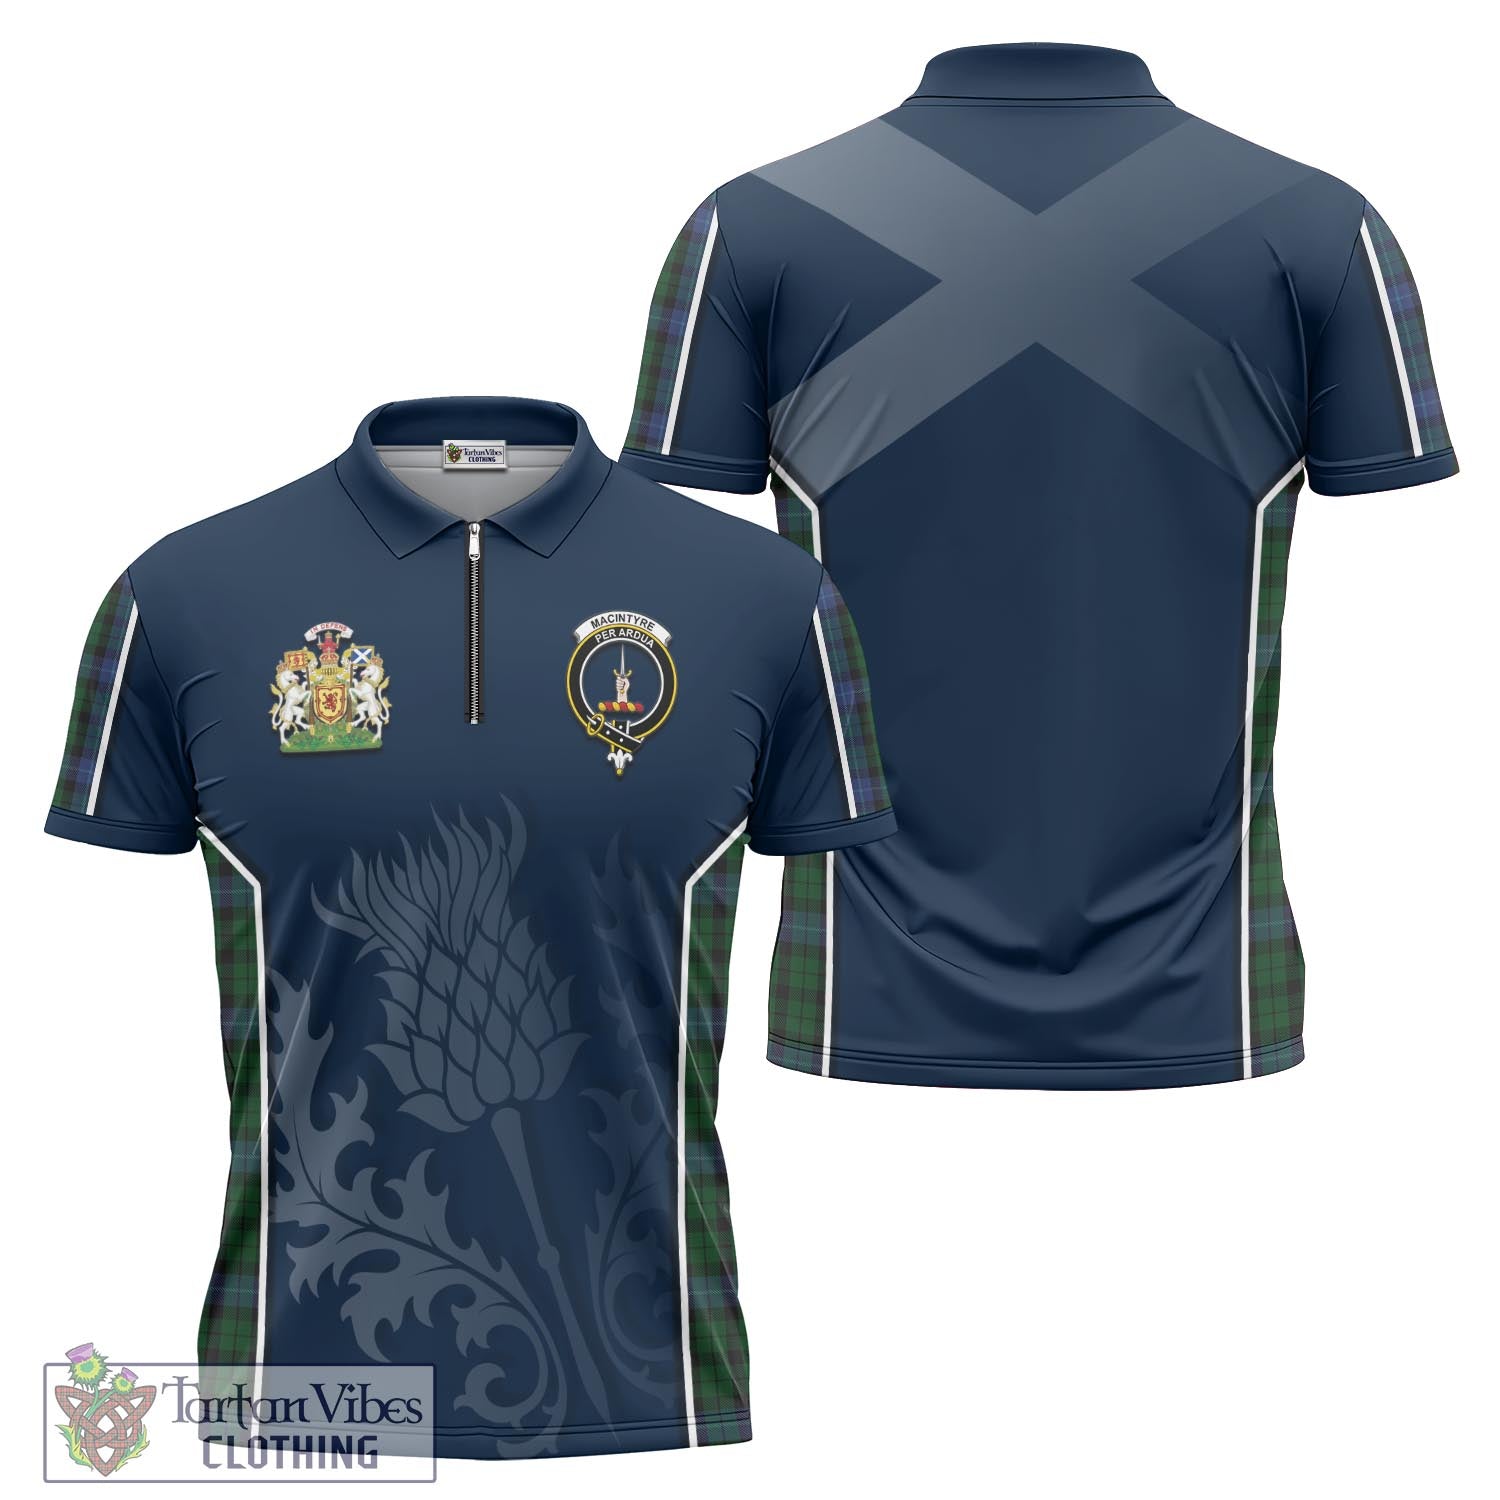 Tartan Vibes Clothing MacIntyre Tartan Zipper Polo Shirt with Family Crest and Scottish Thistle Vibes Sport Style